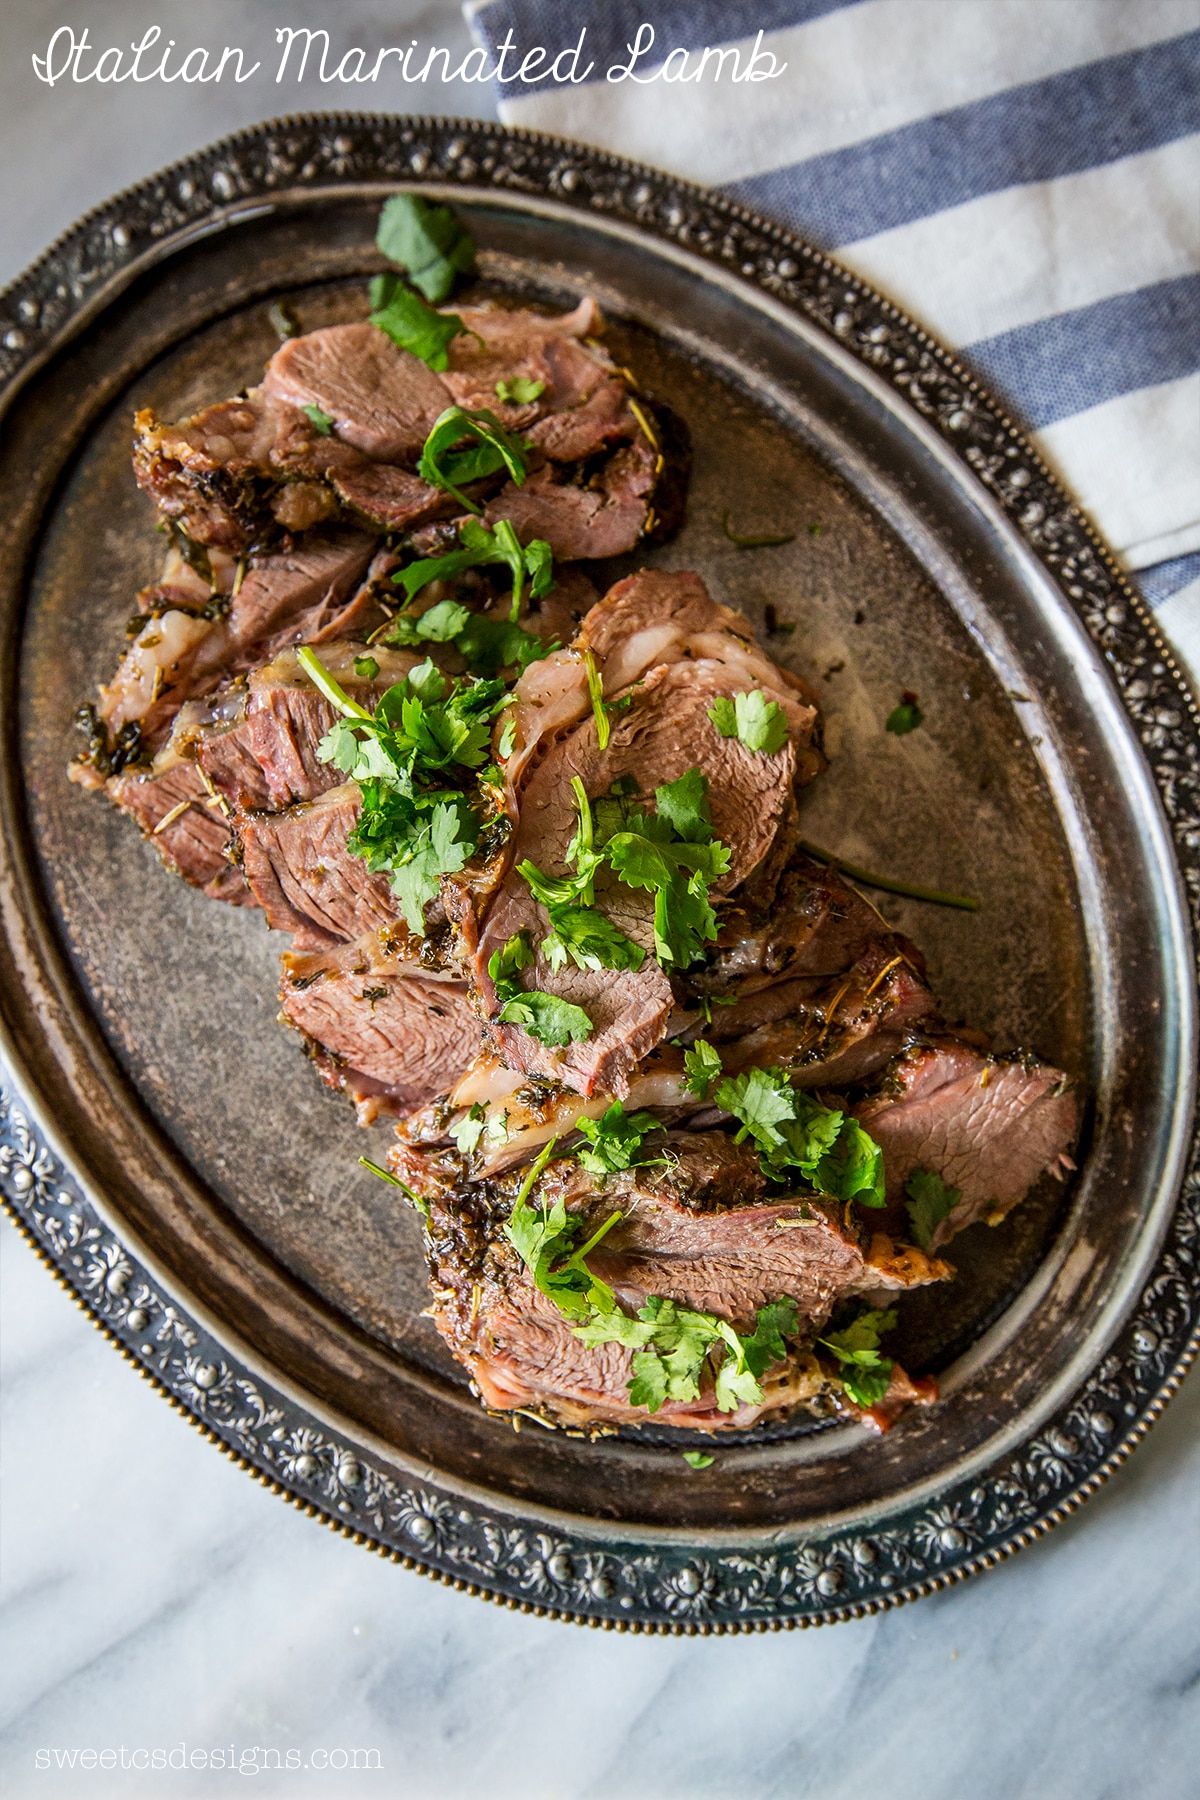 Italian Marinated Lamb- this is one of the most delicious and easy ways to make lamb!